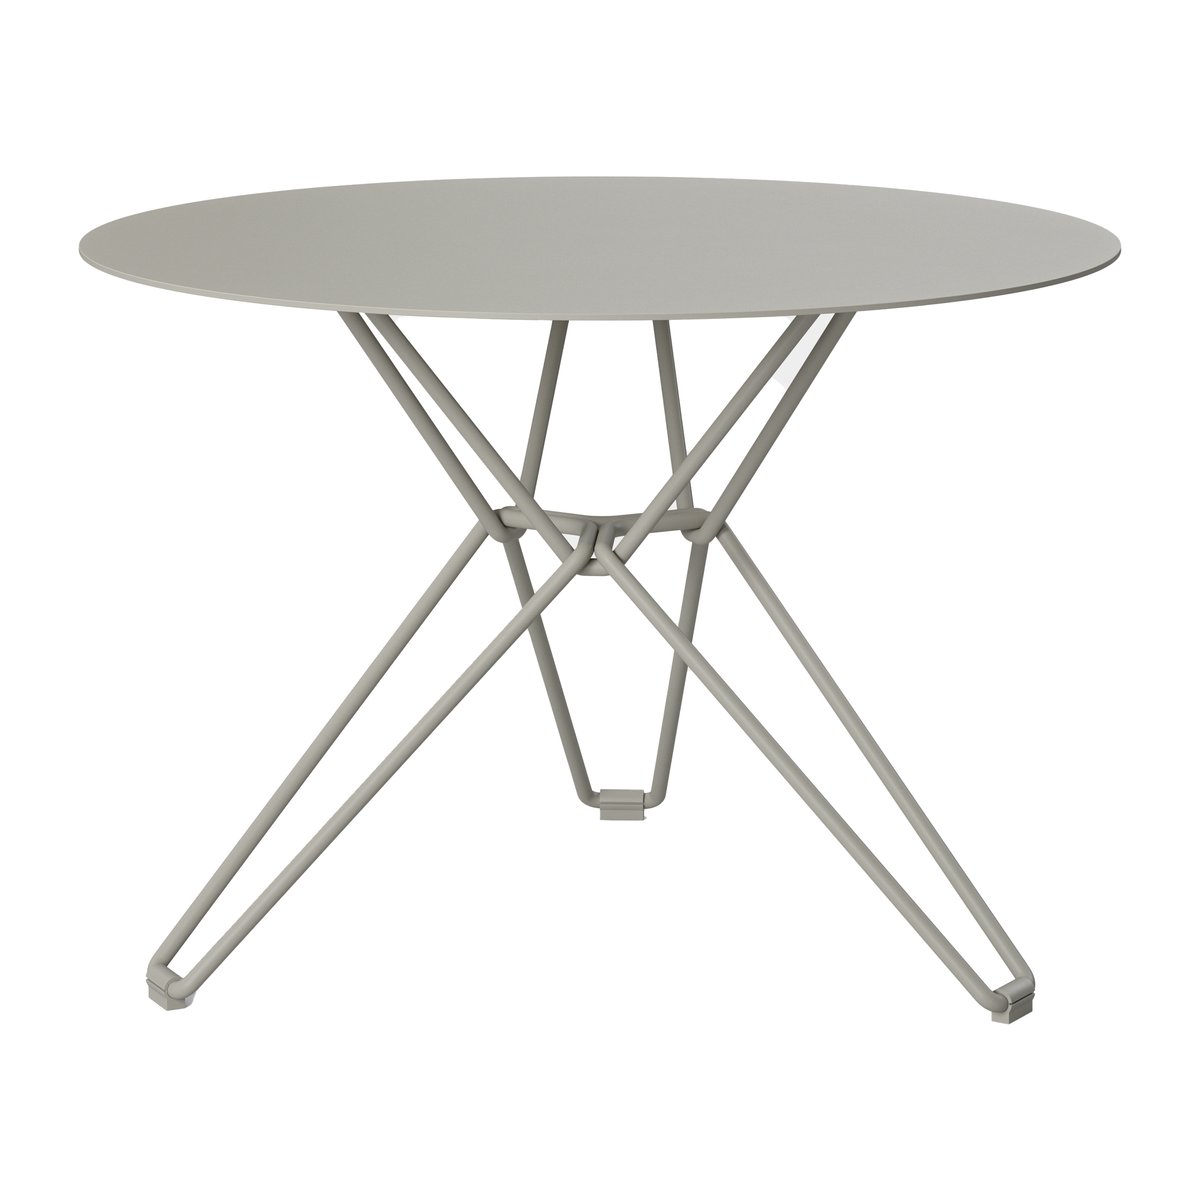 massproductions table d'appoint tio ø 60 cm stone grey